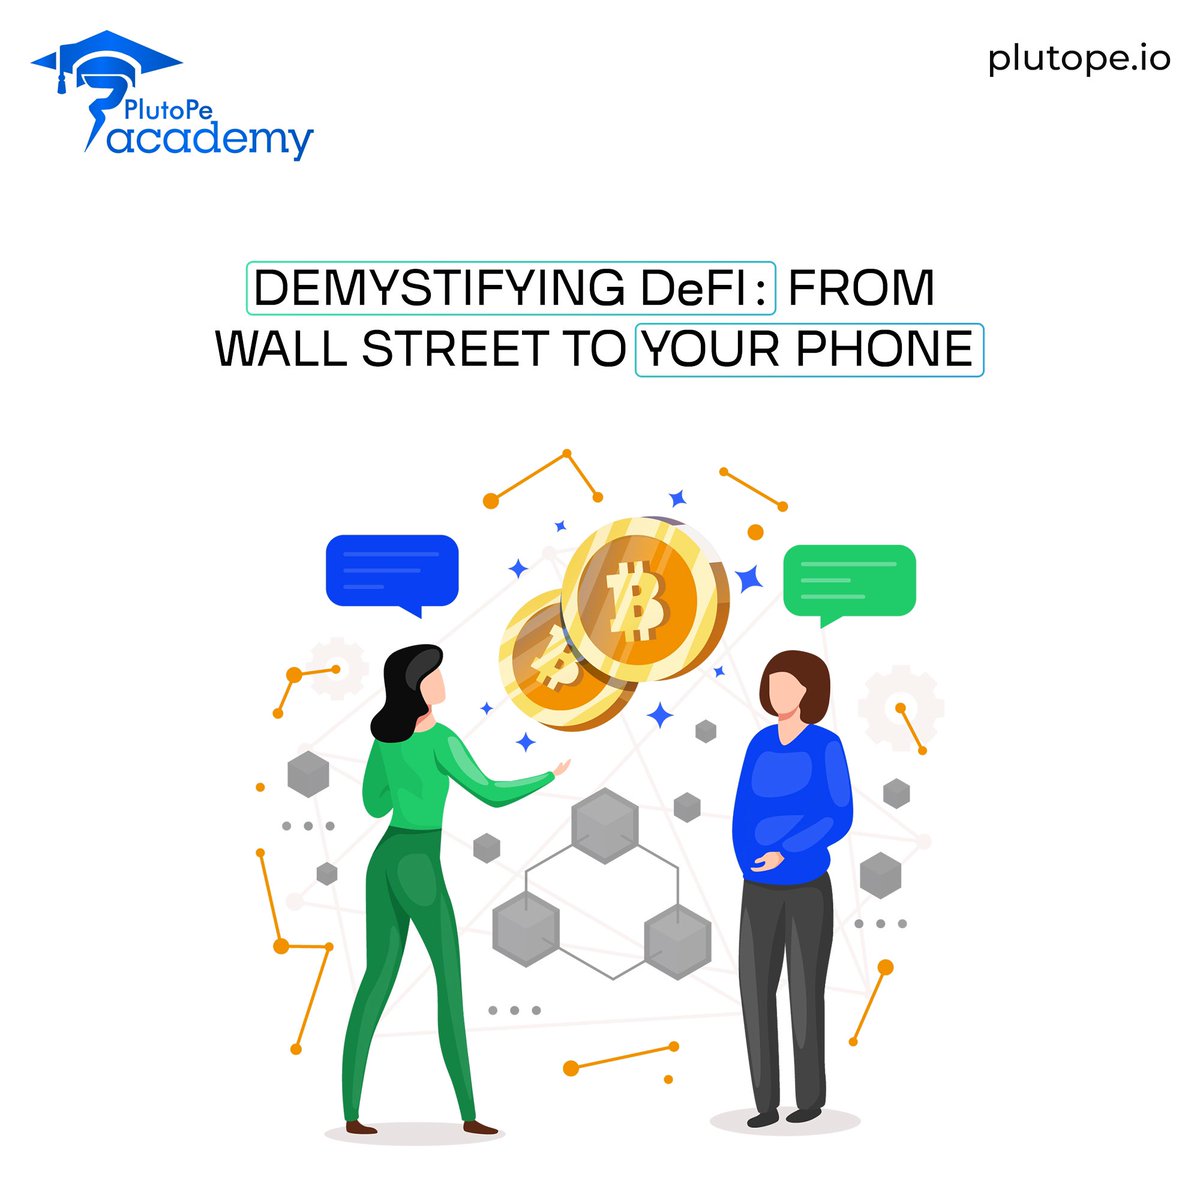 Magic Money Magic Tricks? It's #DeFi 🪄 Remember GPay & Paytm letting you pay digitally? Now imagine '' magic internet money' doing bank stuff like loans & interest, all without a bank! That's DeFi!🏦 🤔Think: GPay & Paytm are cool, but banks control things like loans. DeFi